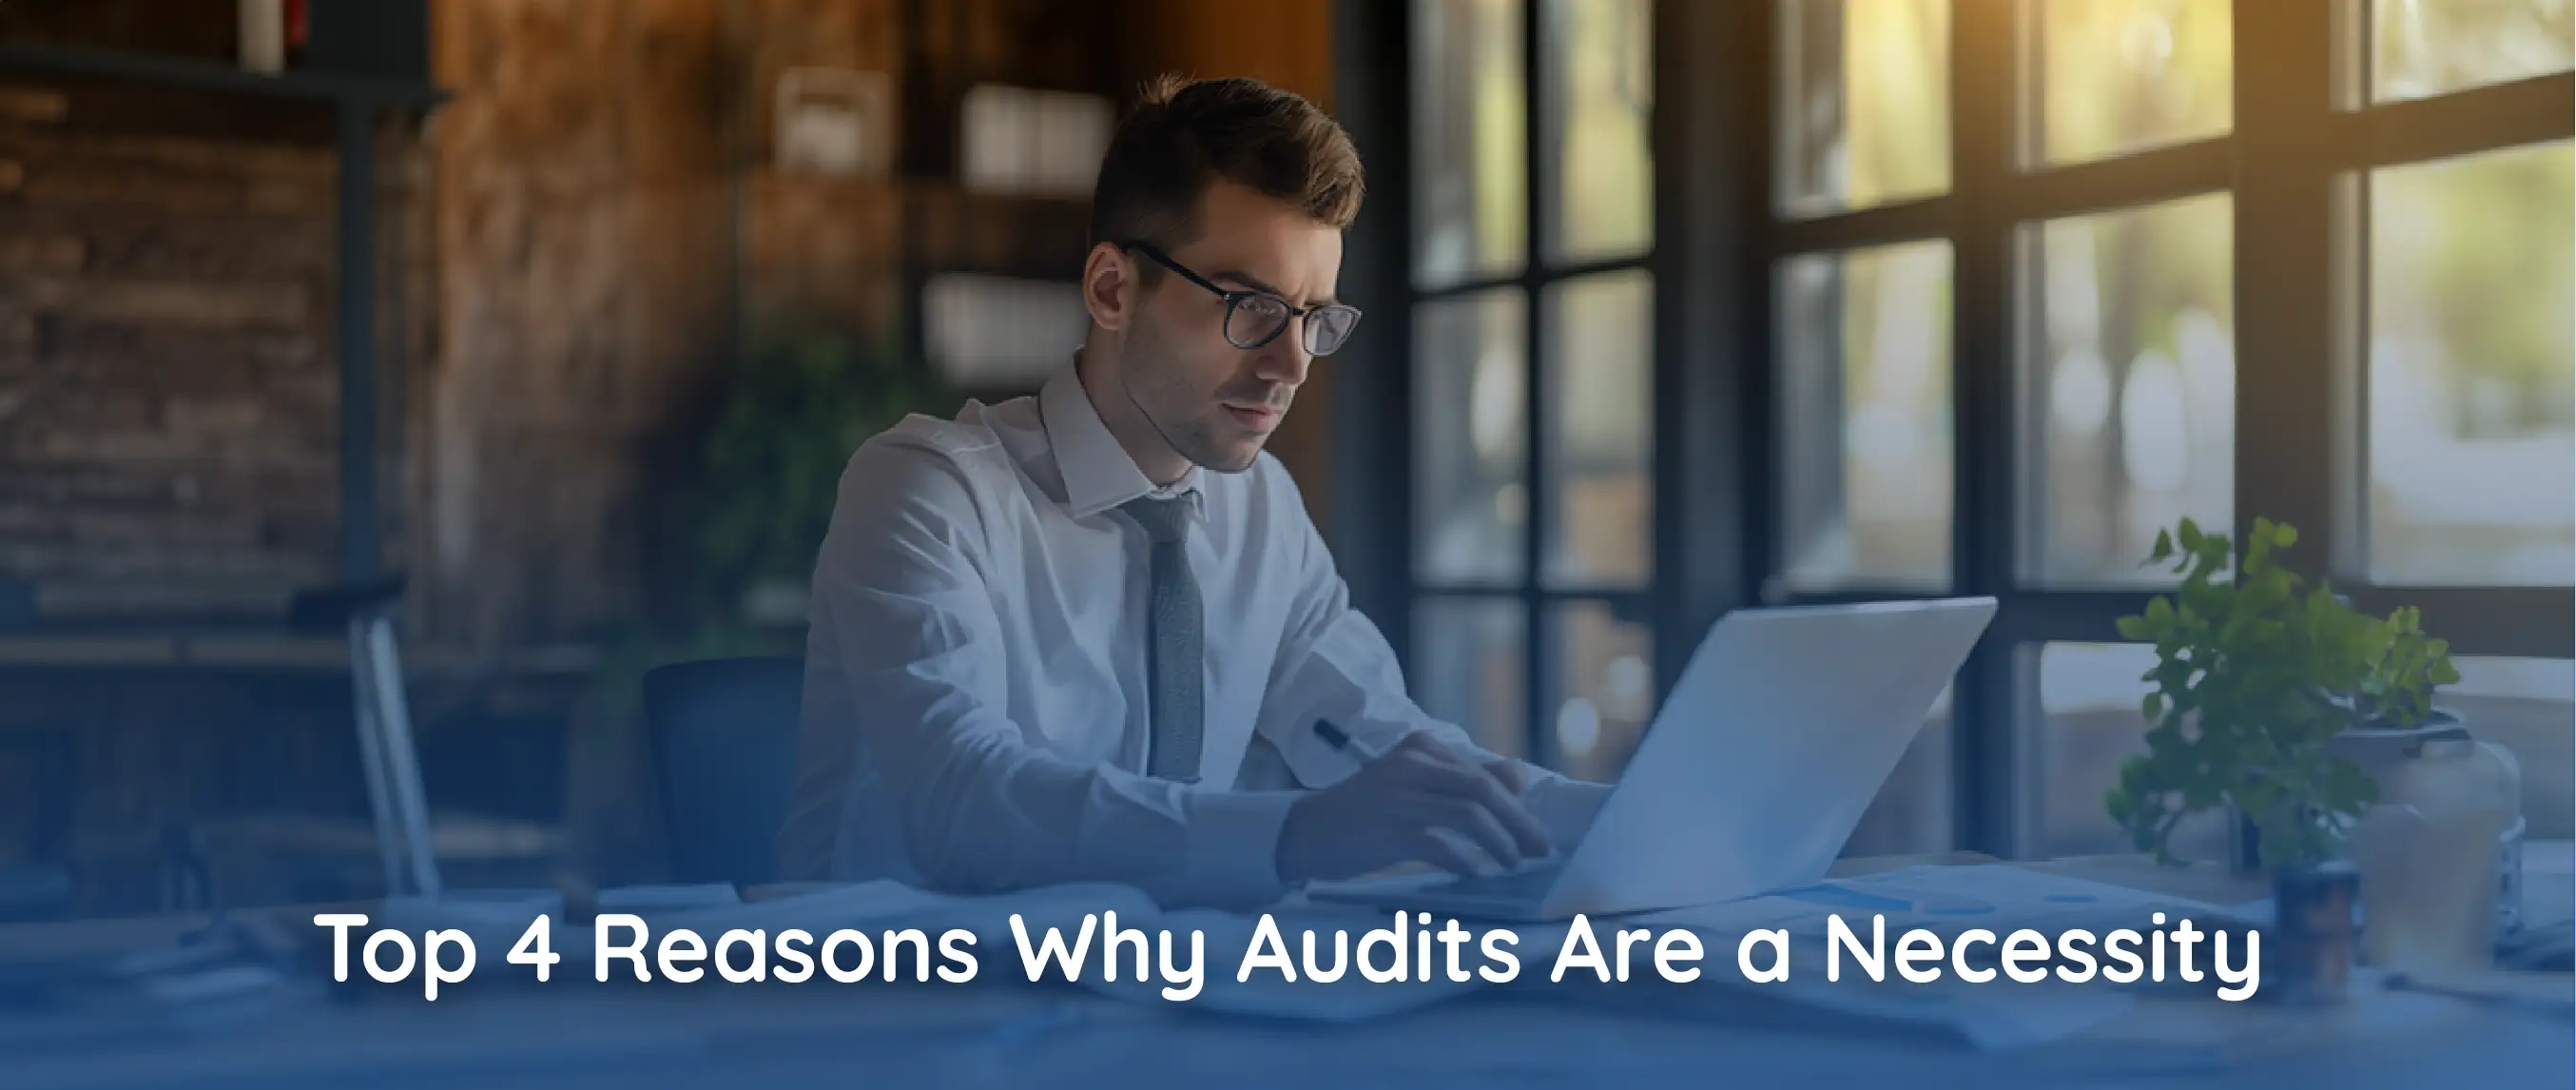 Top 4 Reasons Why Audits Are a Necessary